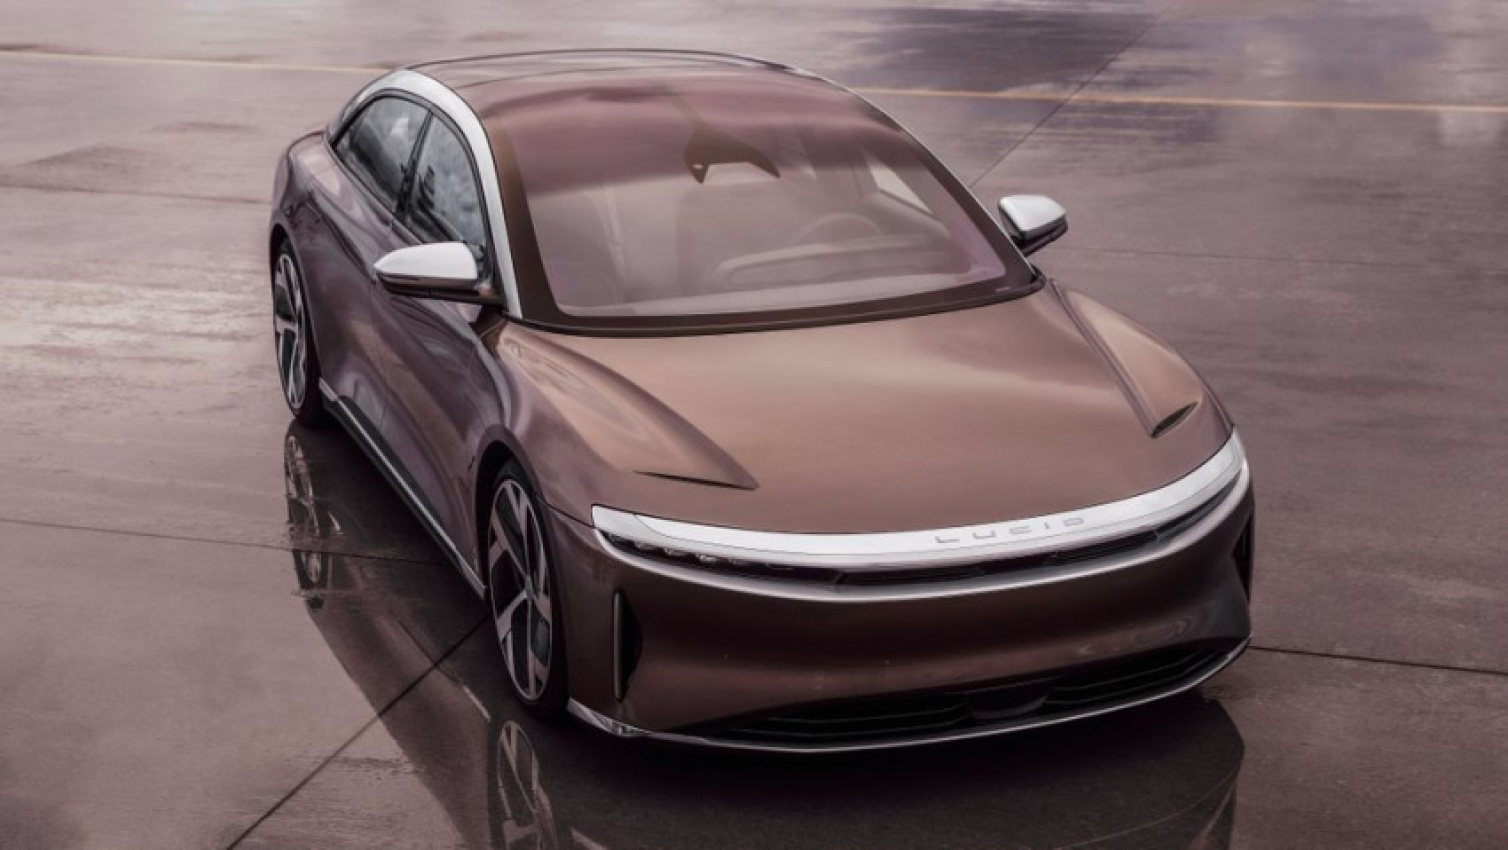 apple, autos, cars, hp, lucid, air, auto news, california, ccs, ev, iphone, limousine, tesla, luxurious 1,080hp lucid air is finally ready - it's kind of like the iphone of evs